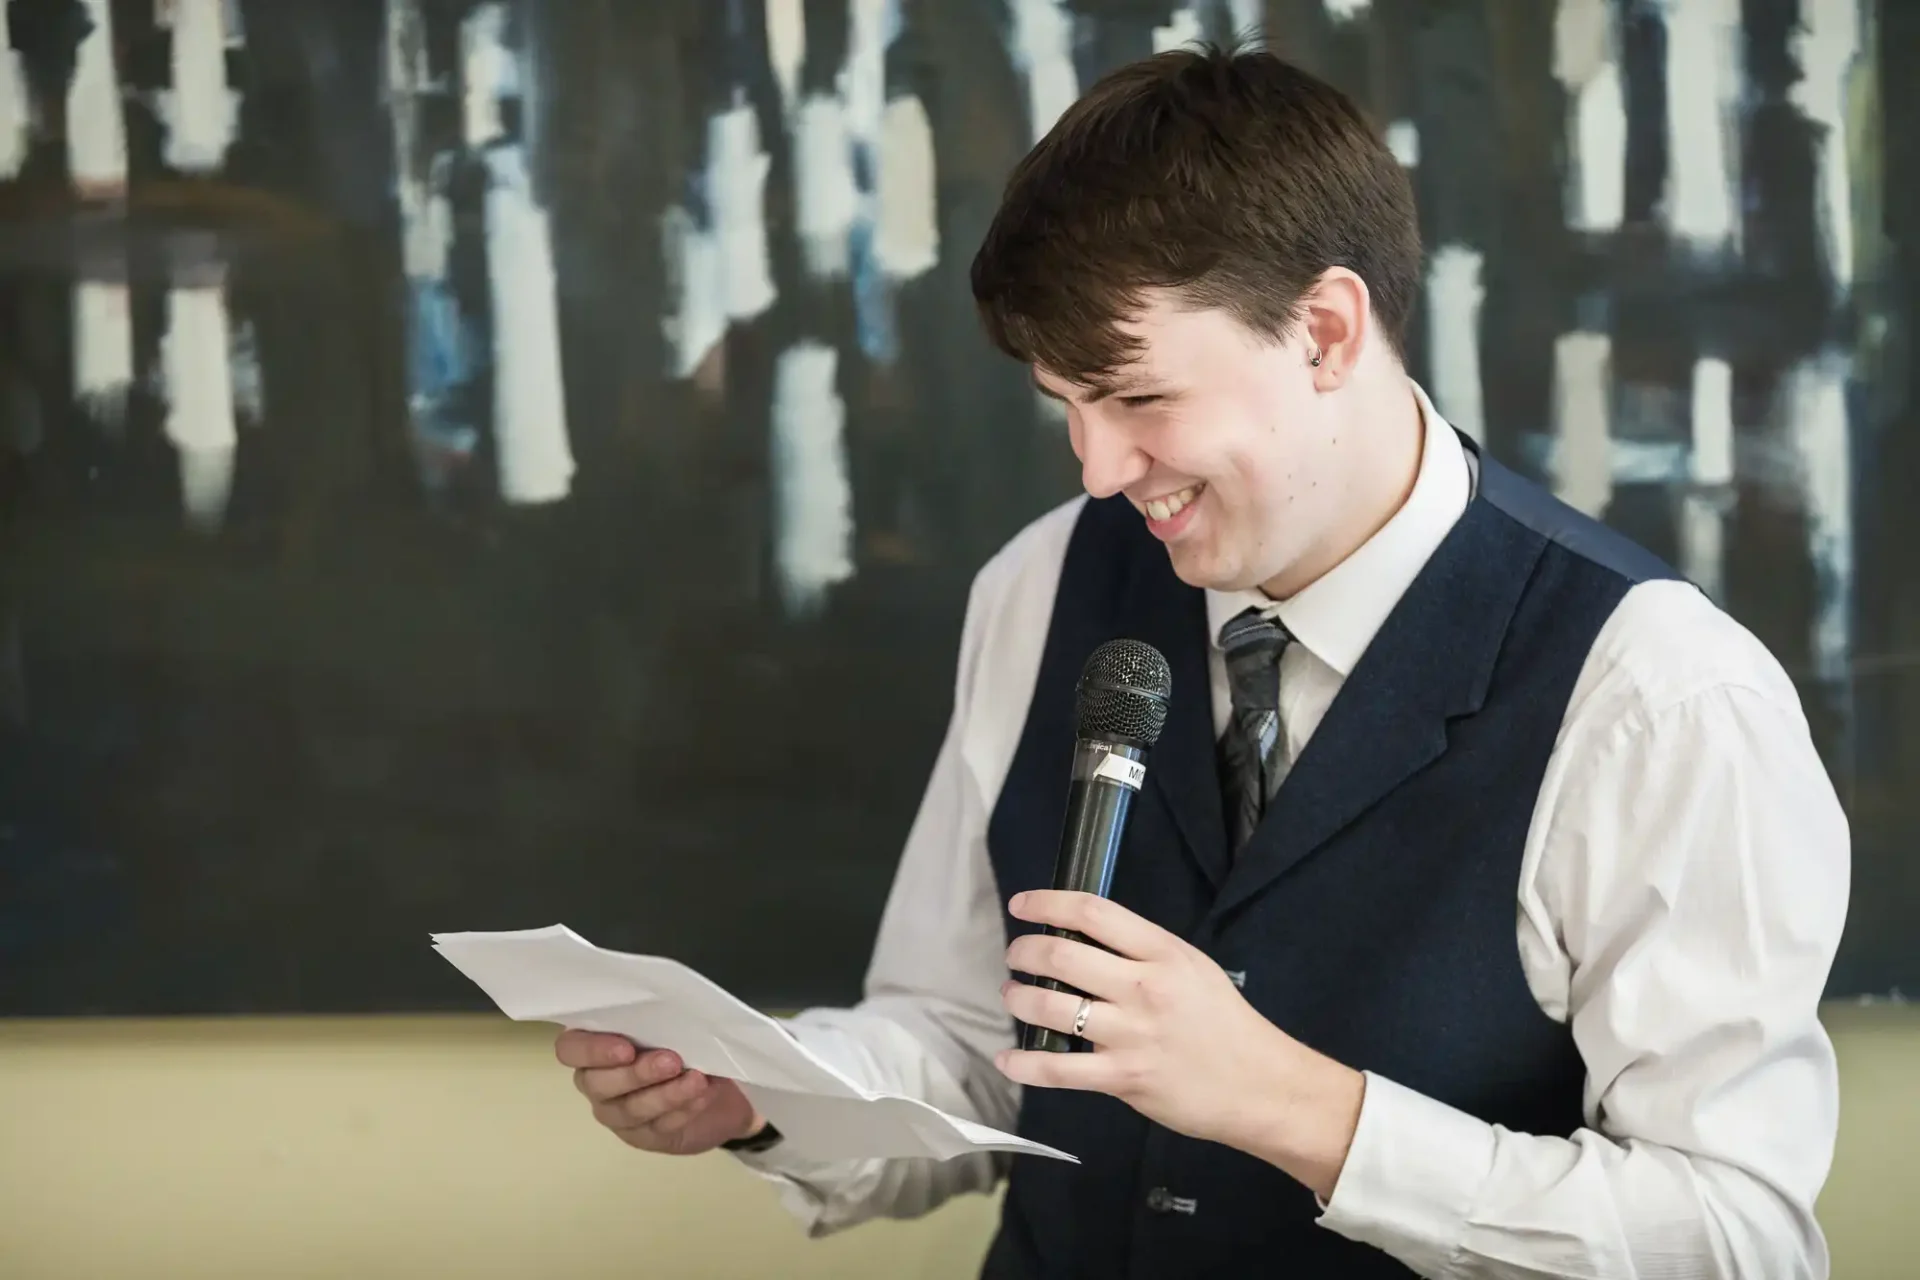 A young man in a vest and tie smiling while reading from a paper and holding a microphone.